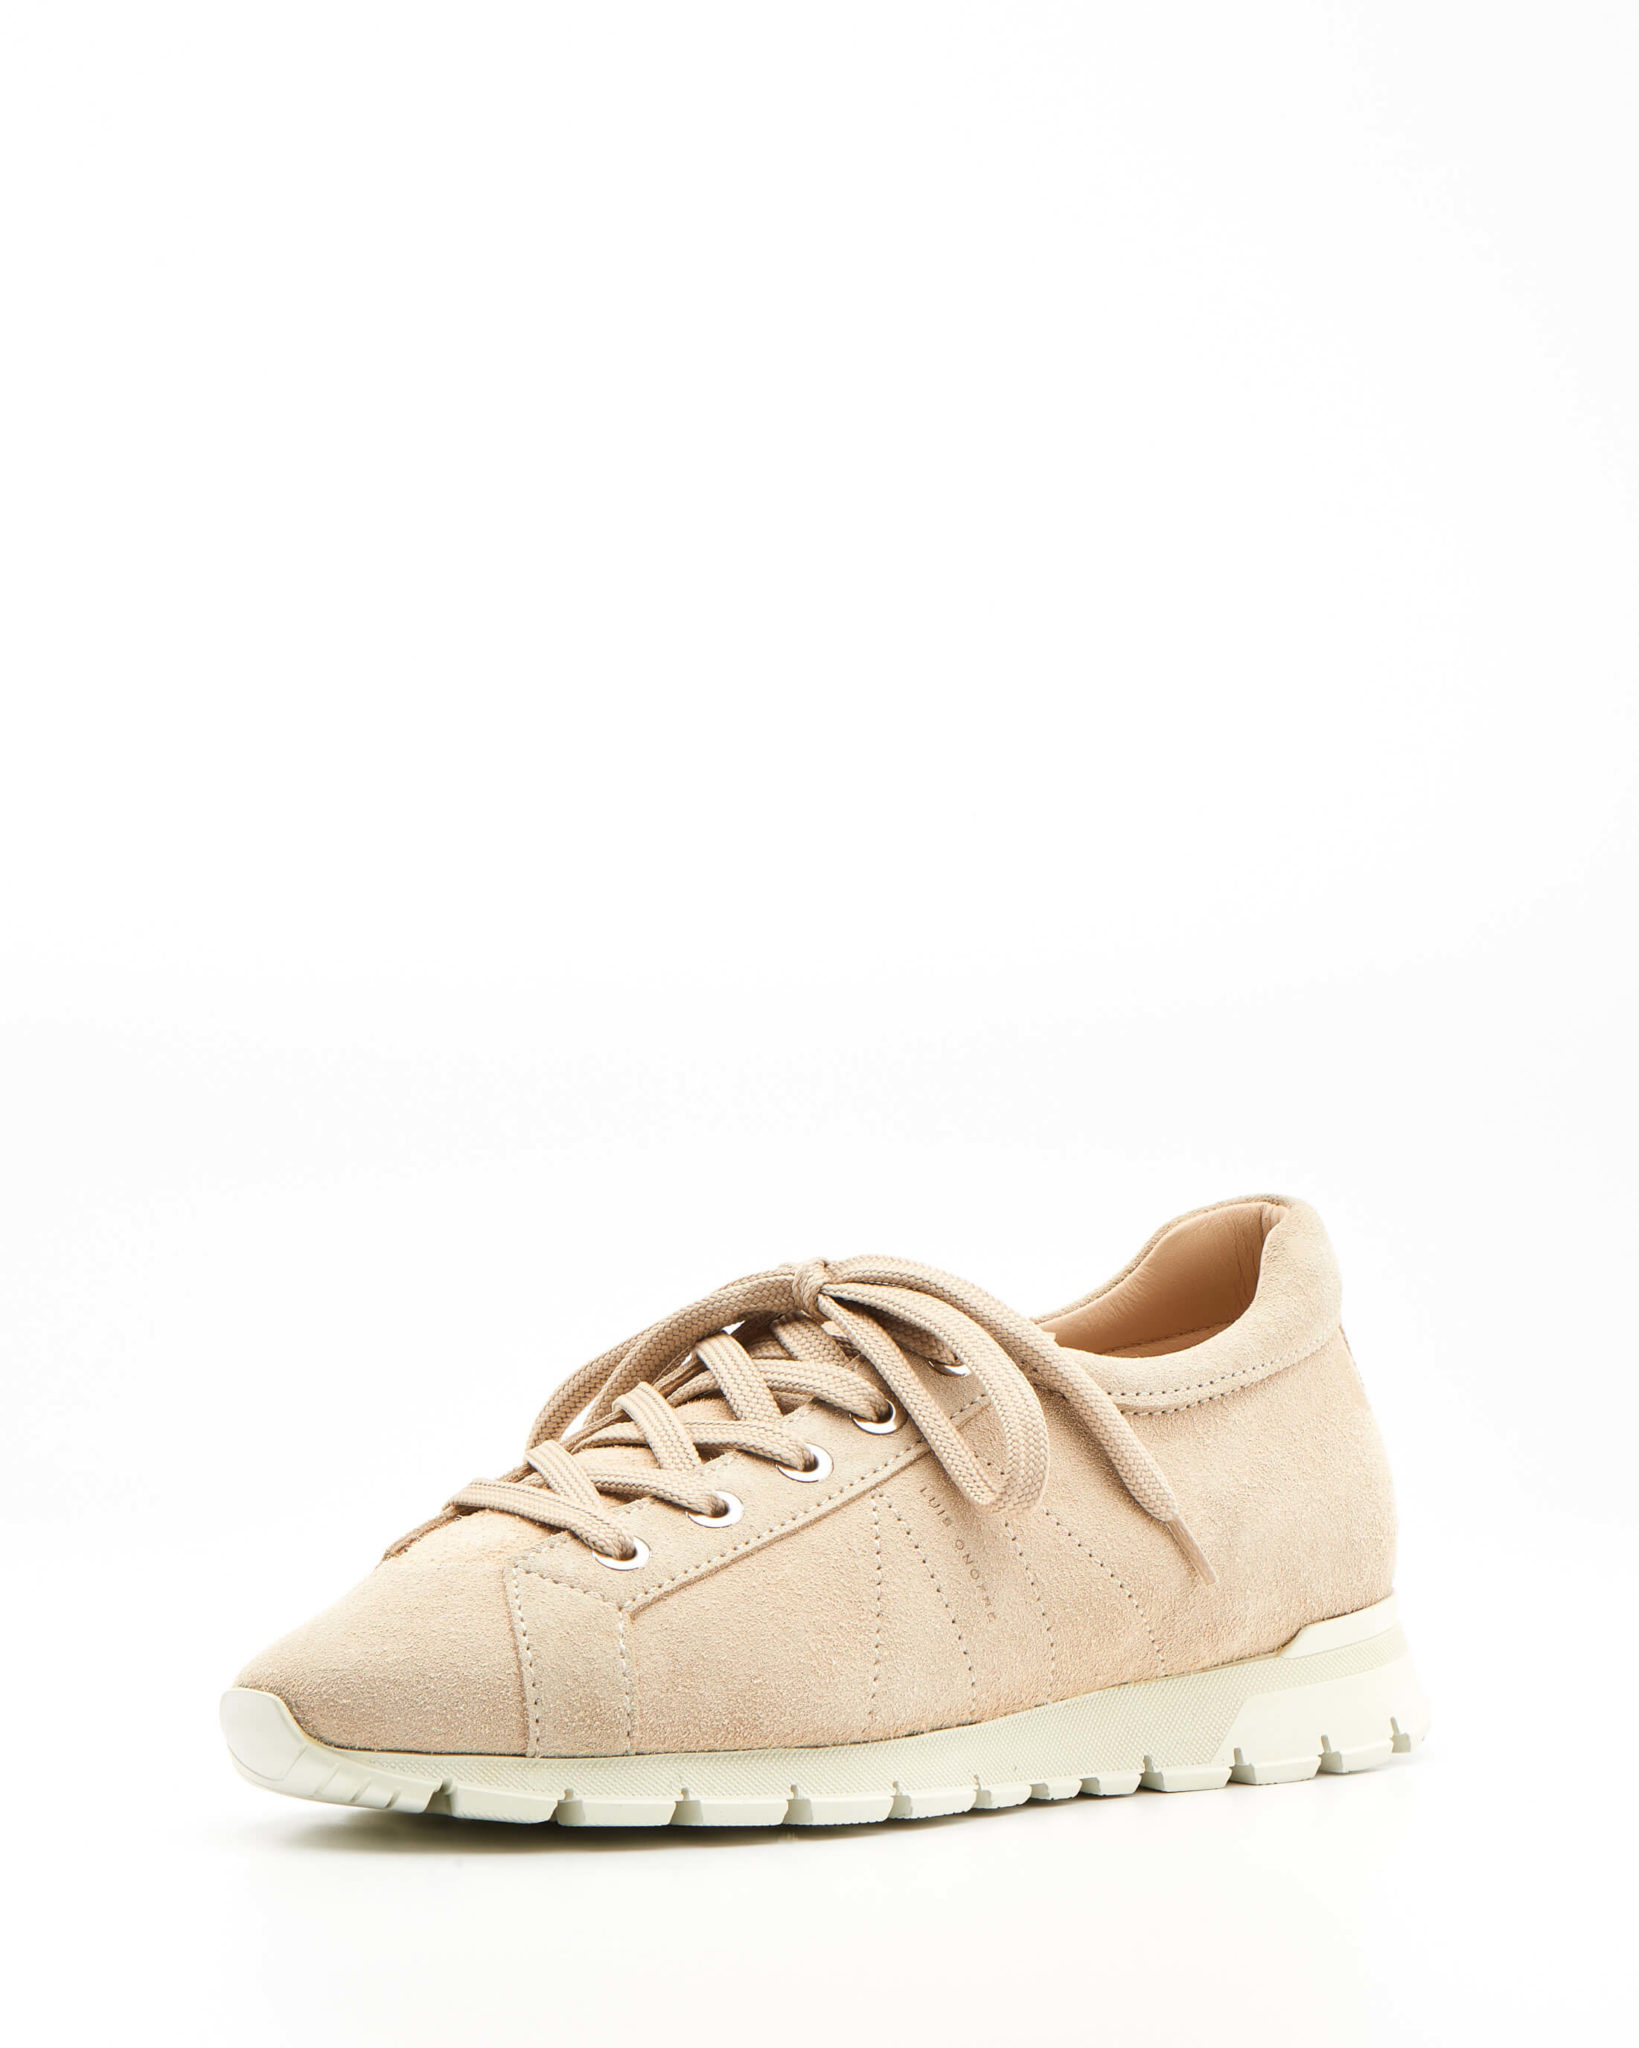 Luis Onofre Portuguese Shoes FW22 – HPOSEID – Oliver Nude-2